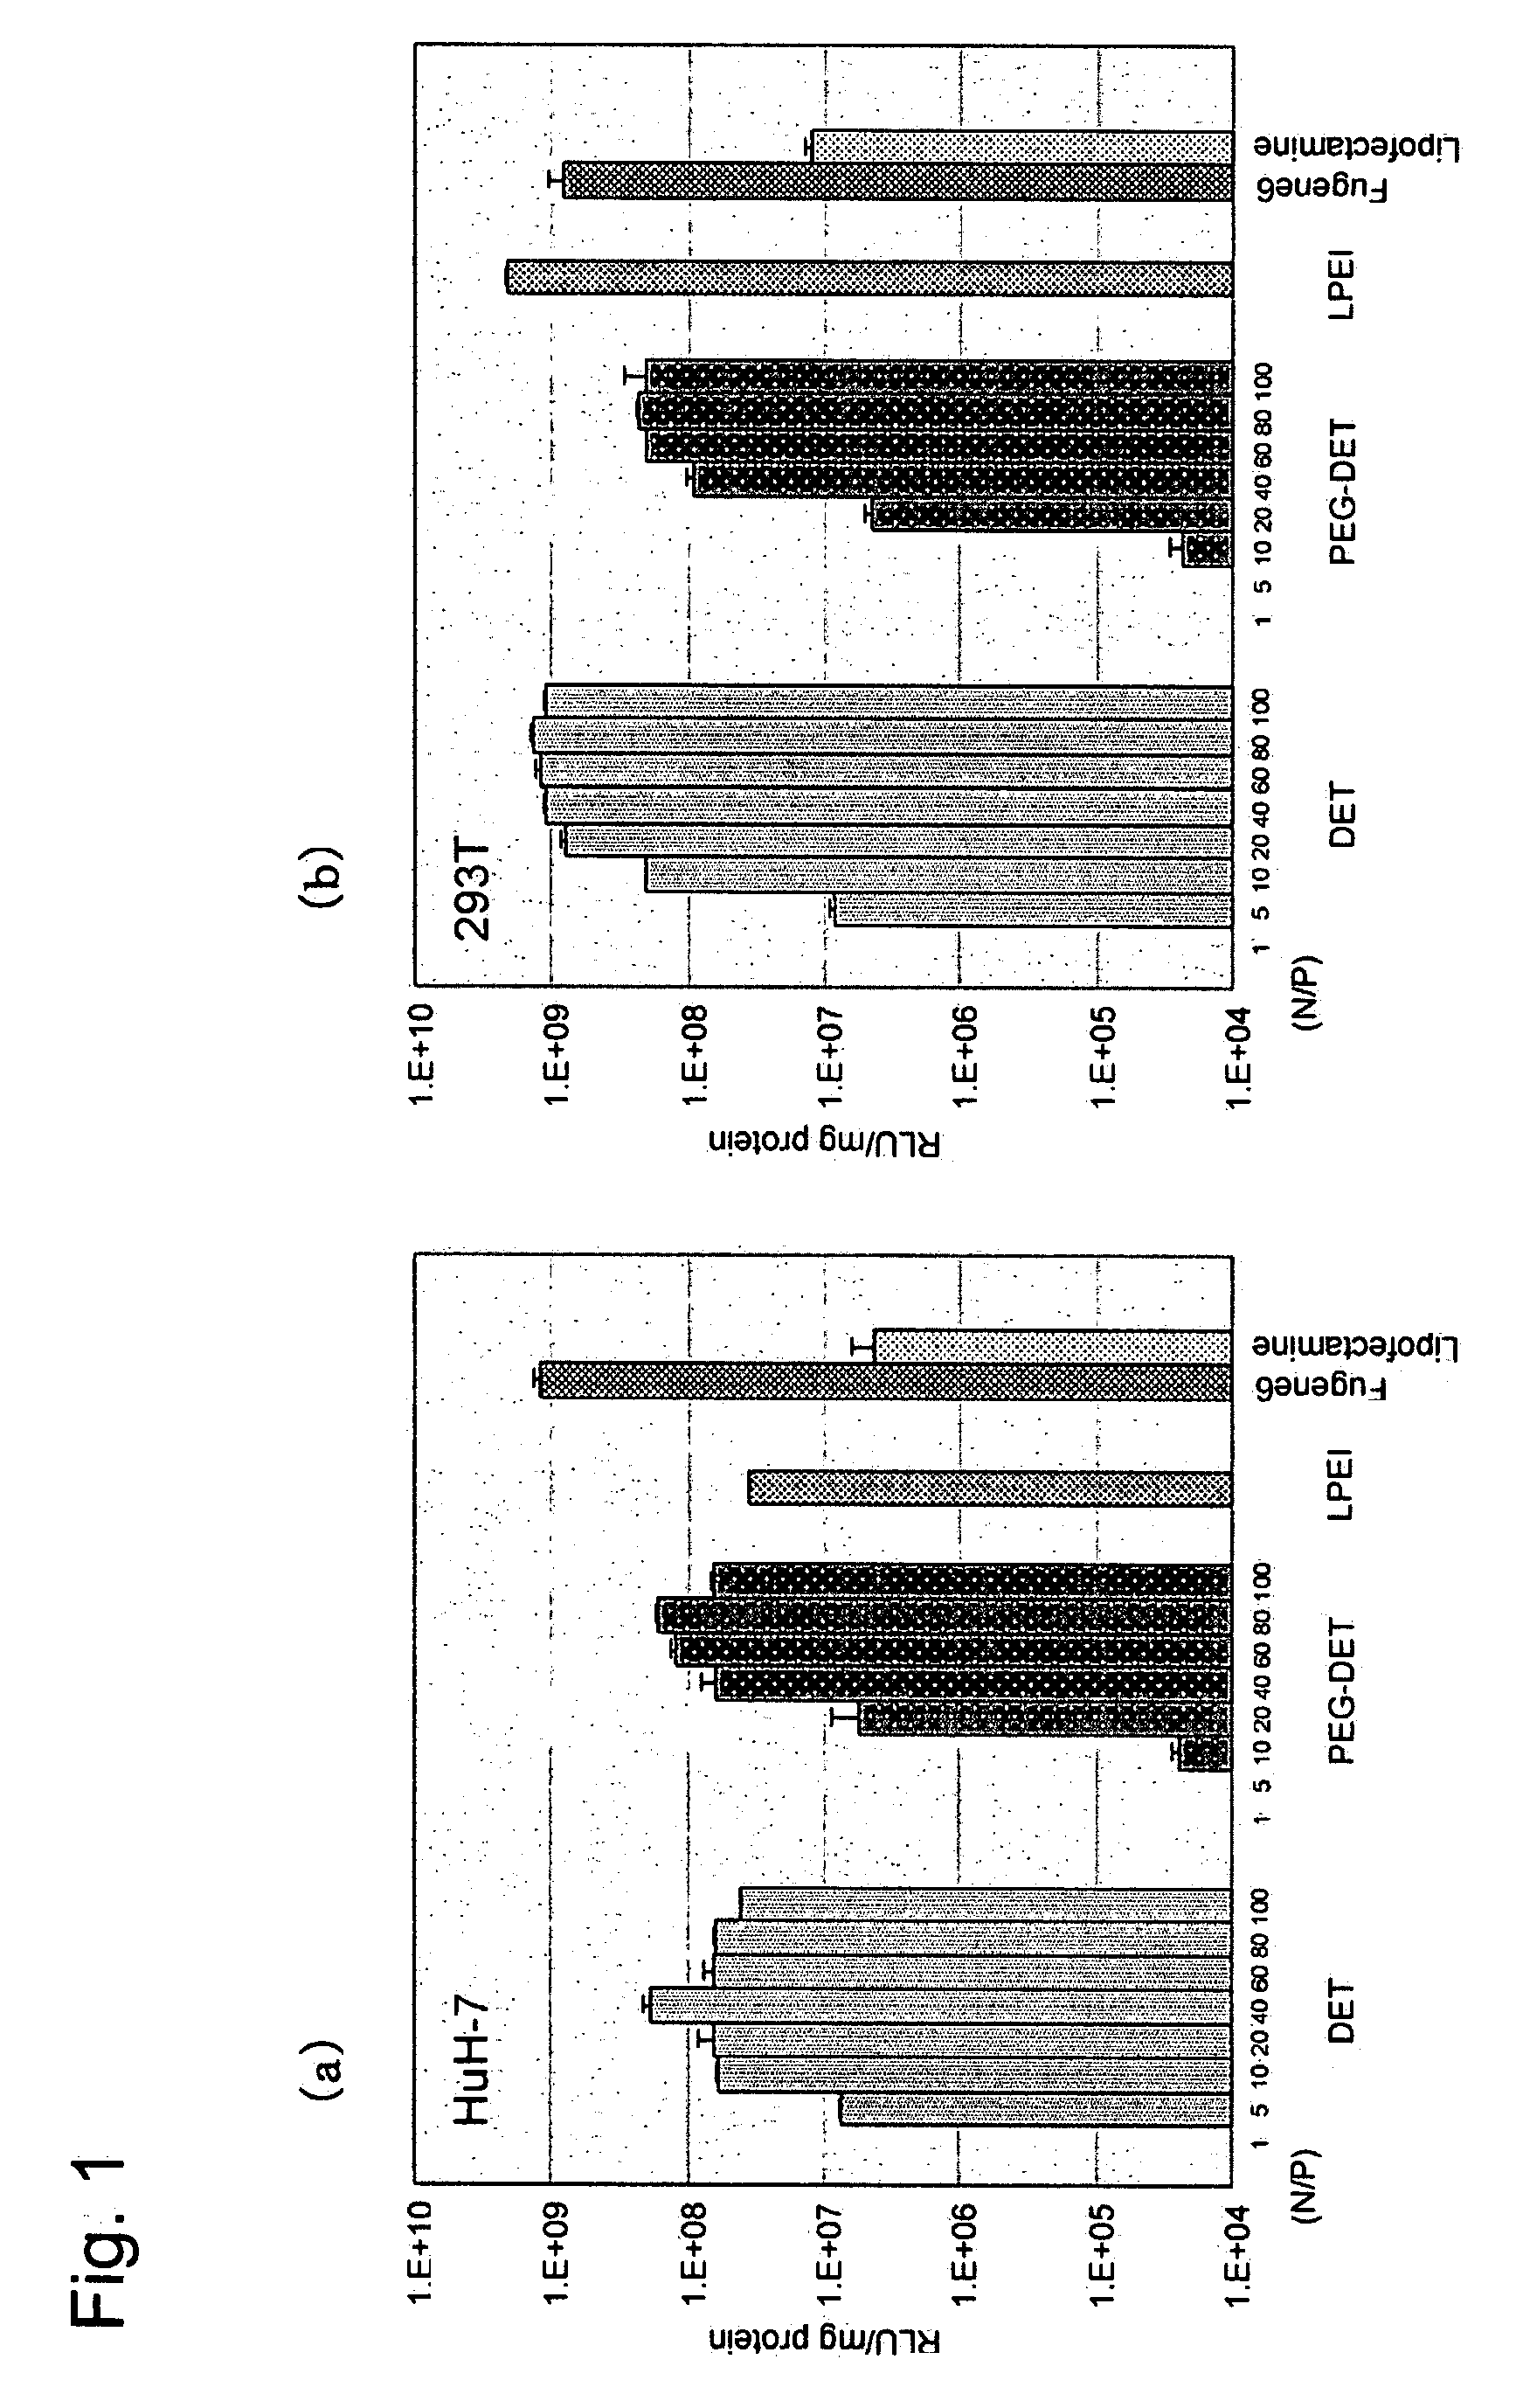 Polycationically Charged Polymer and the Use of the Same as a Carrier for Nucleic Acid